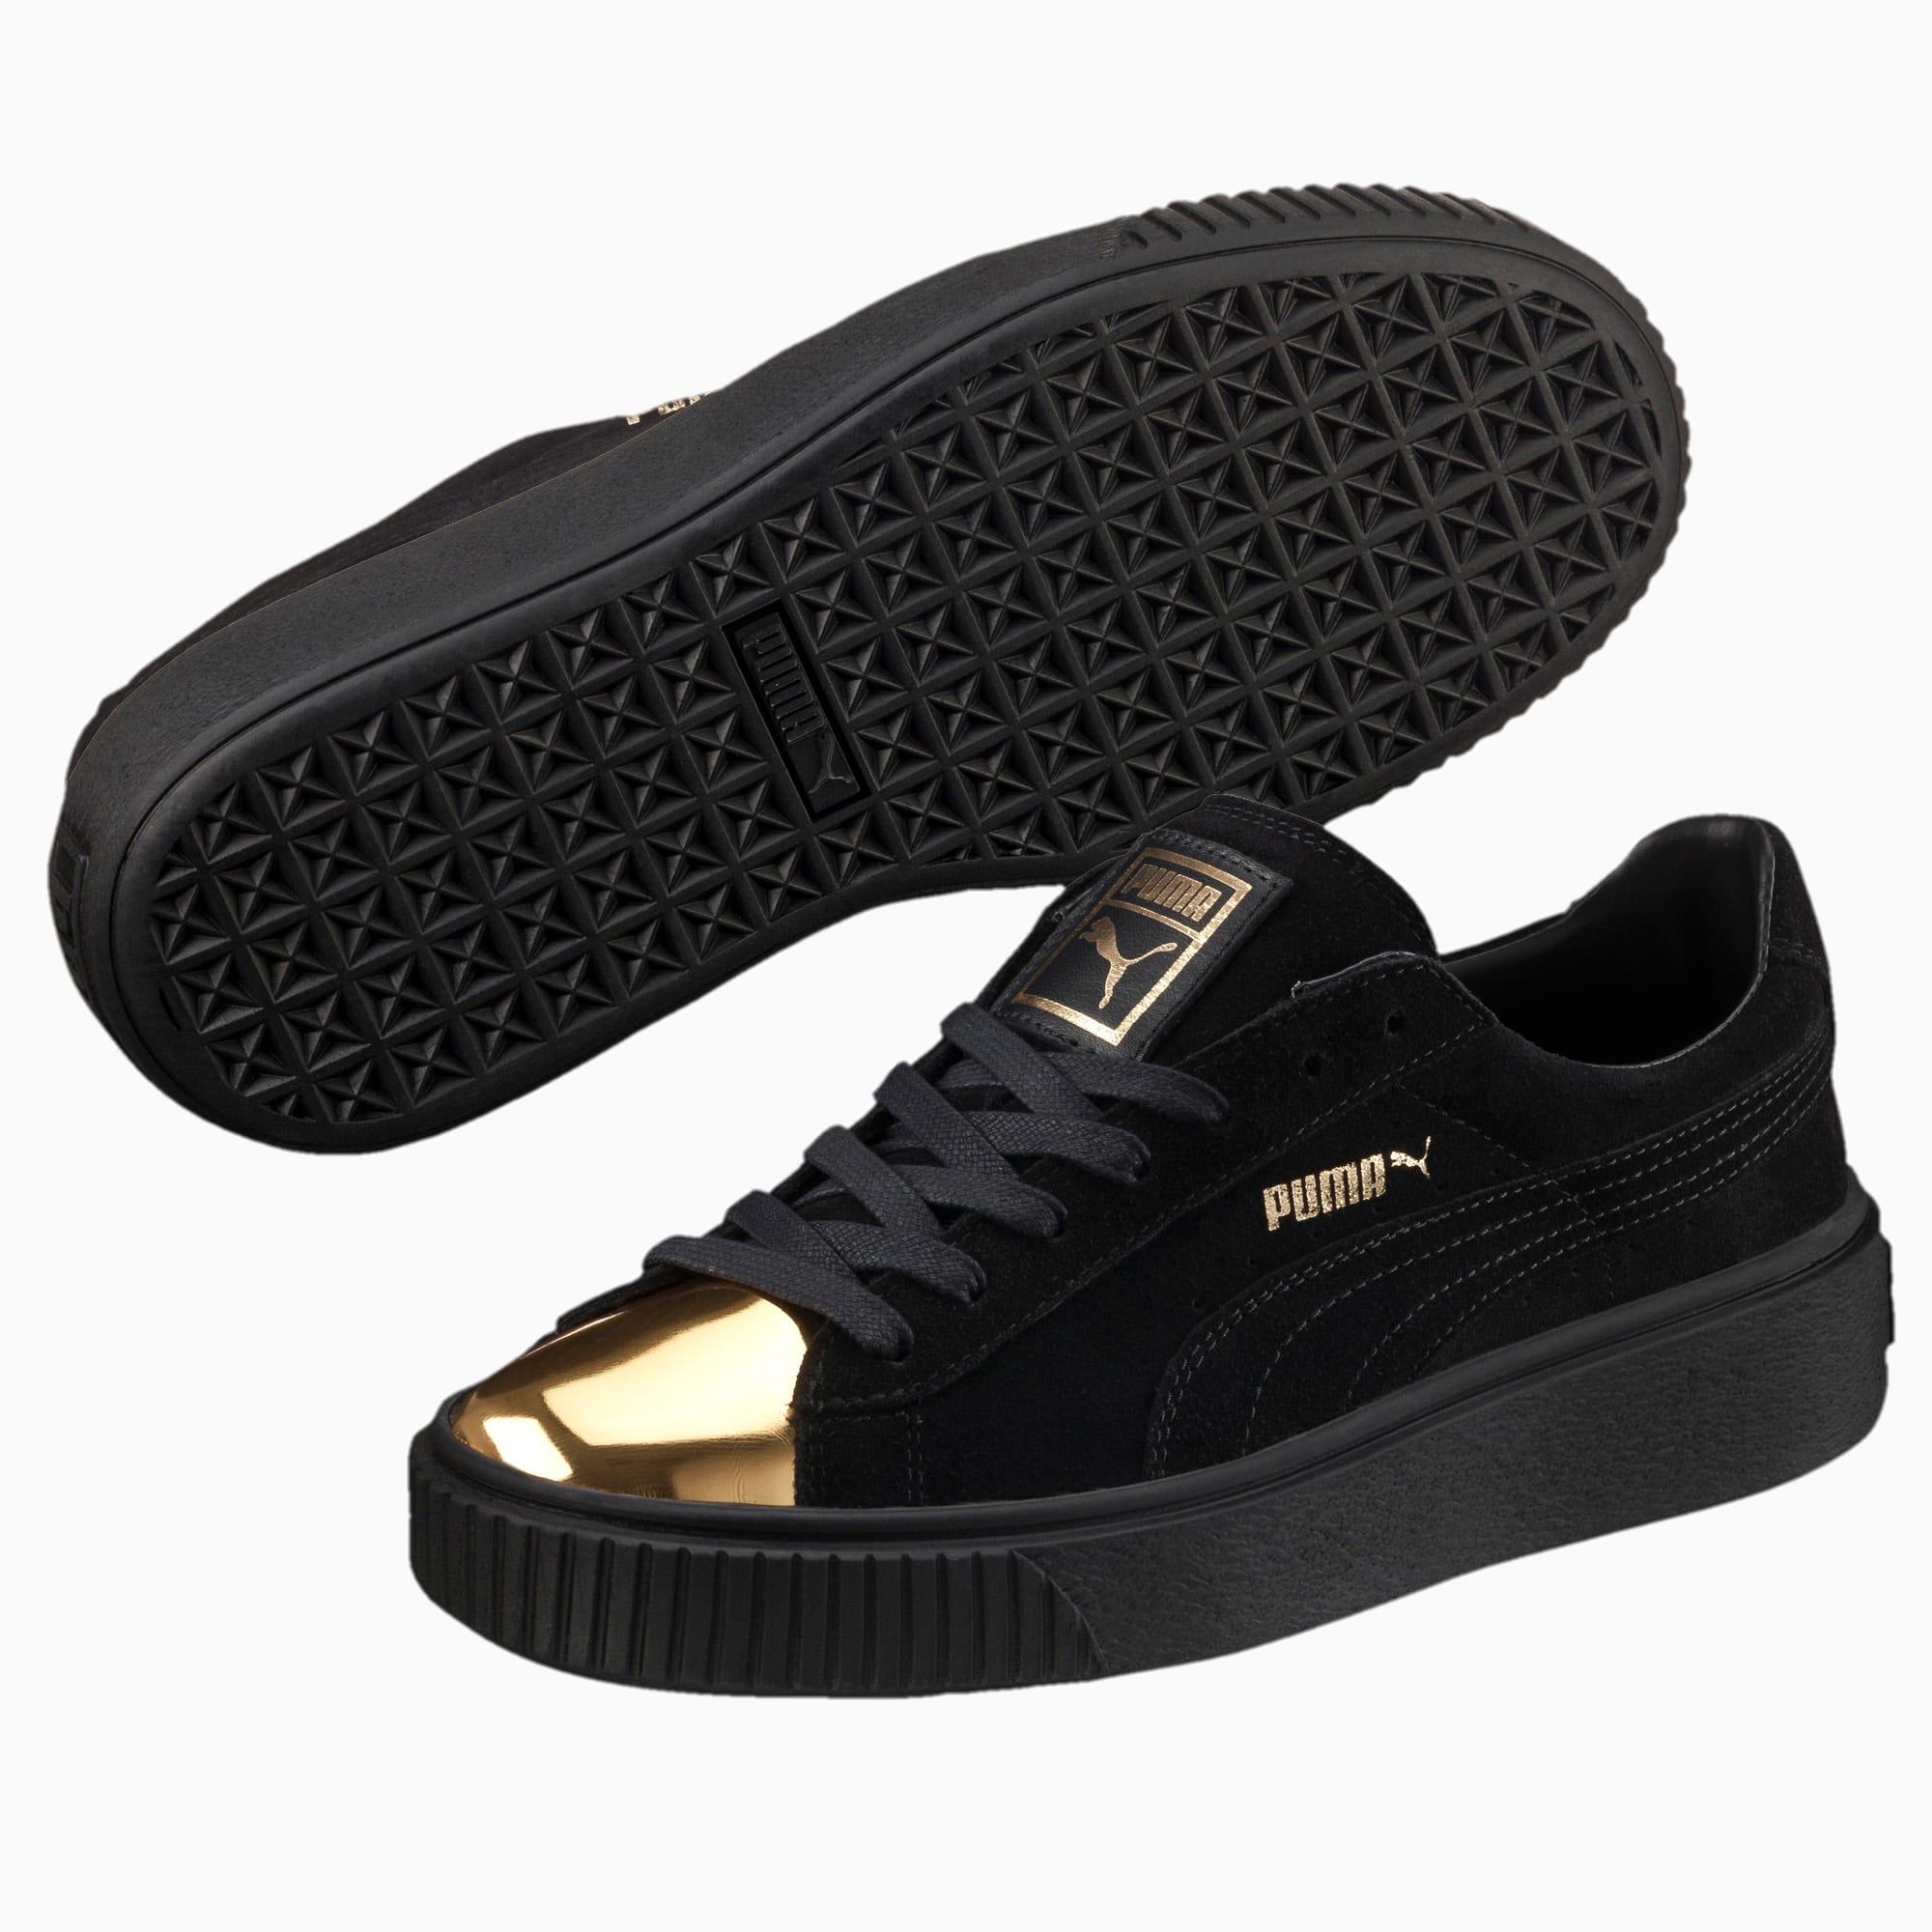 puma shoes black and gold